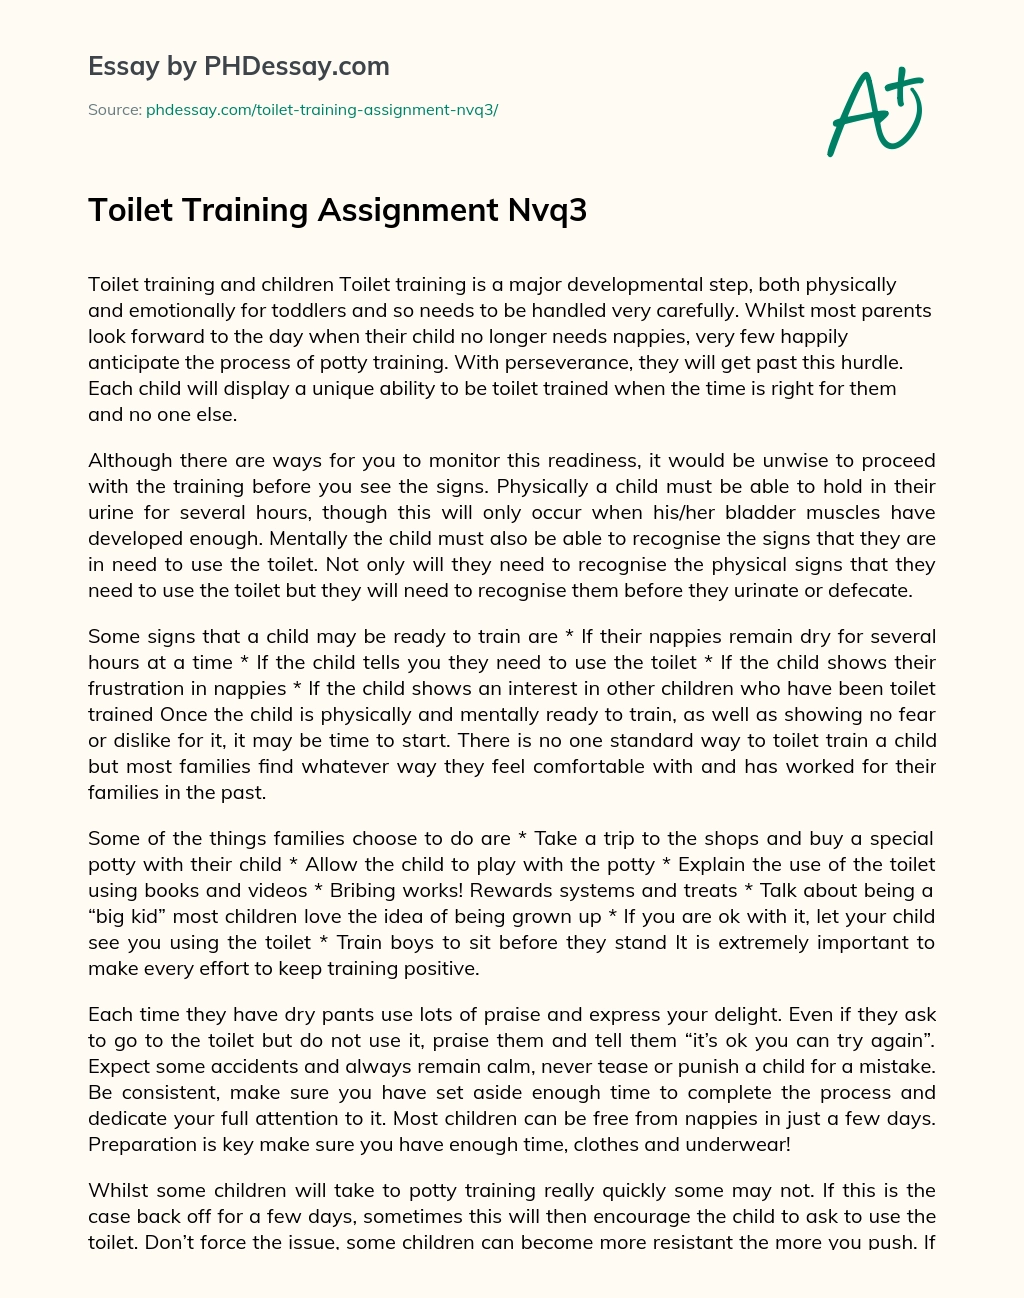 Toilet Training Assignment Nvq3 essay